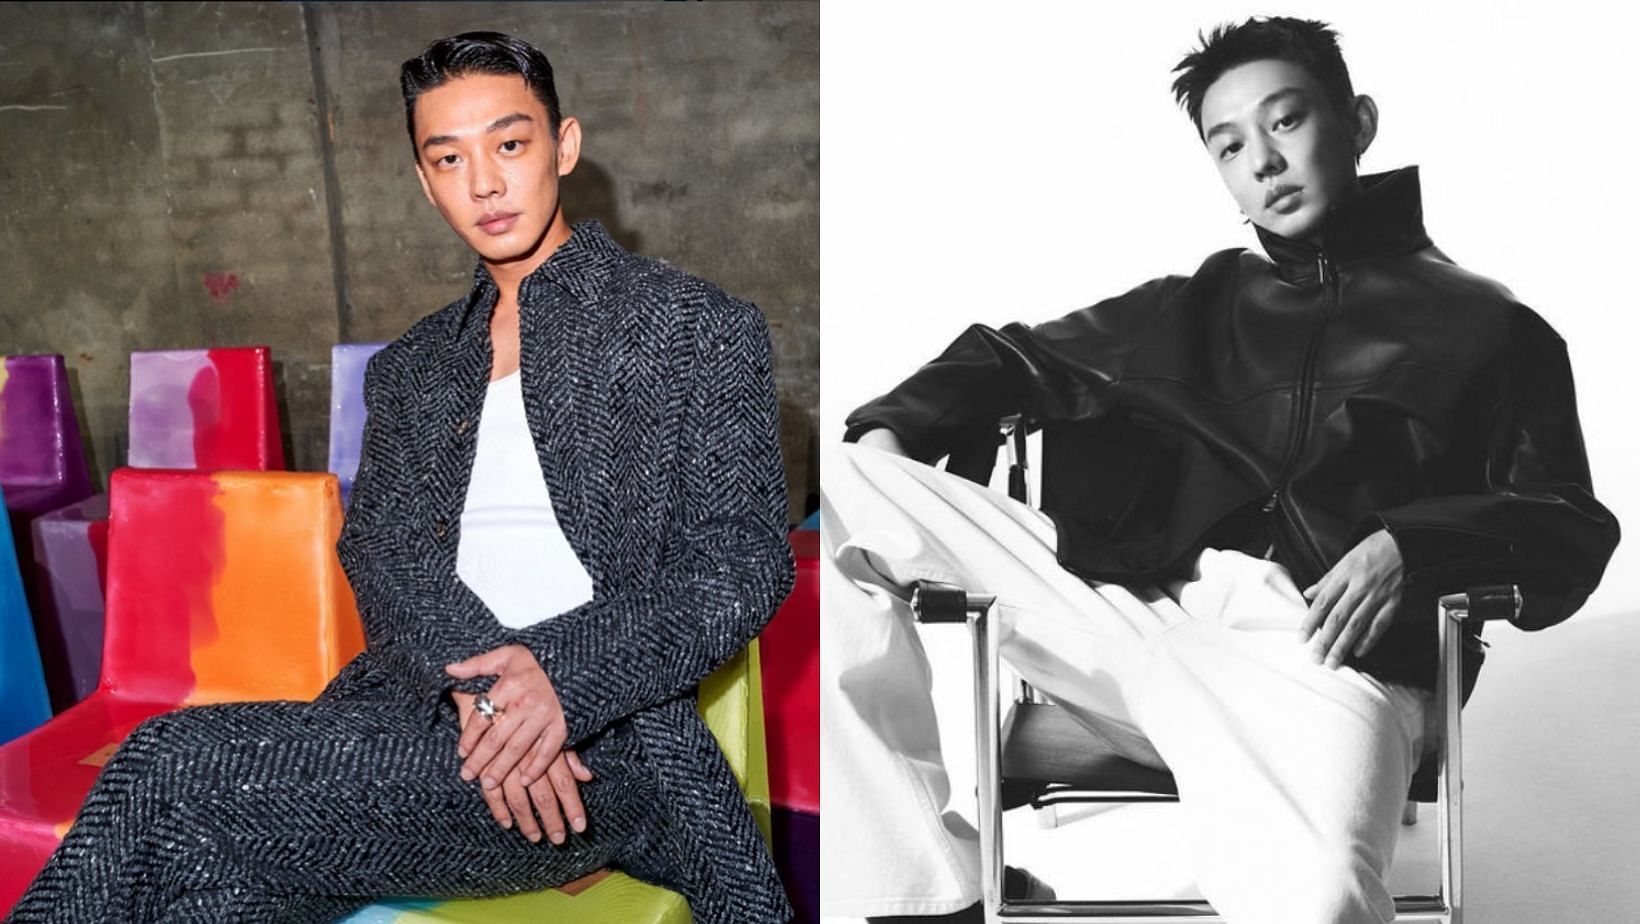 Yoo Ah-in&rsquo;s reported battle with anxiety and depression revealed in court amid ongoing drug trial. (Images via Instagram/@hongsick)